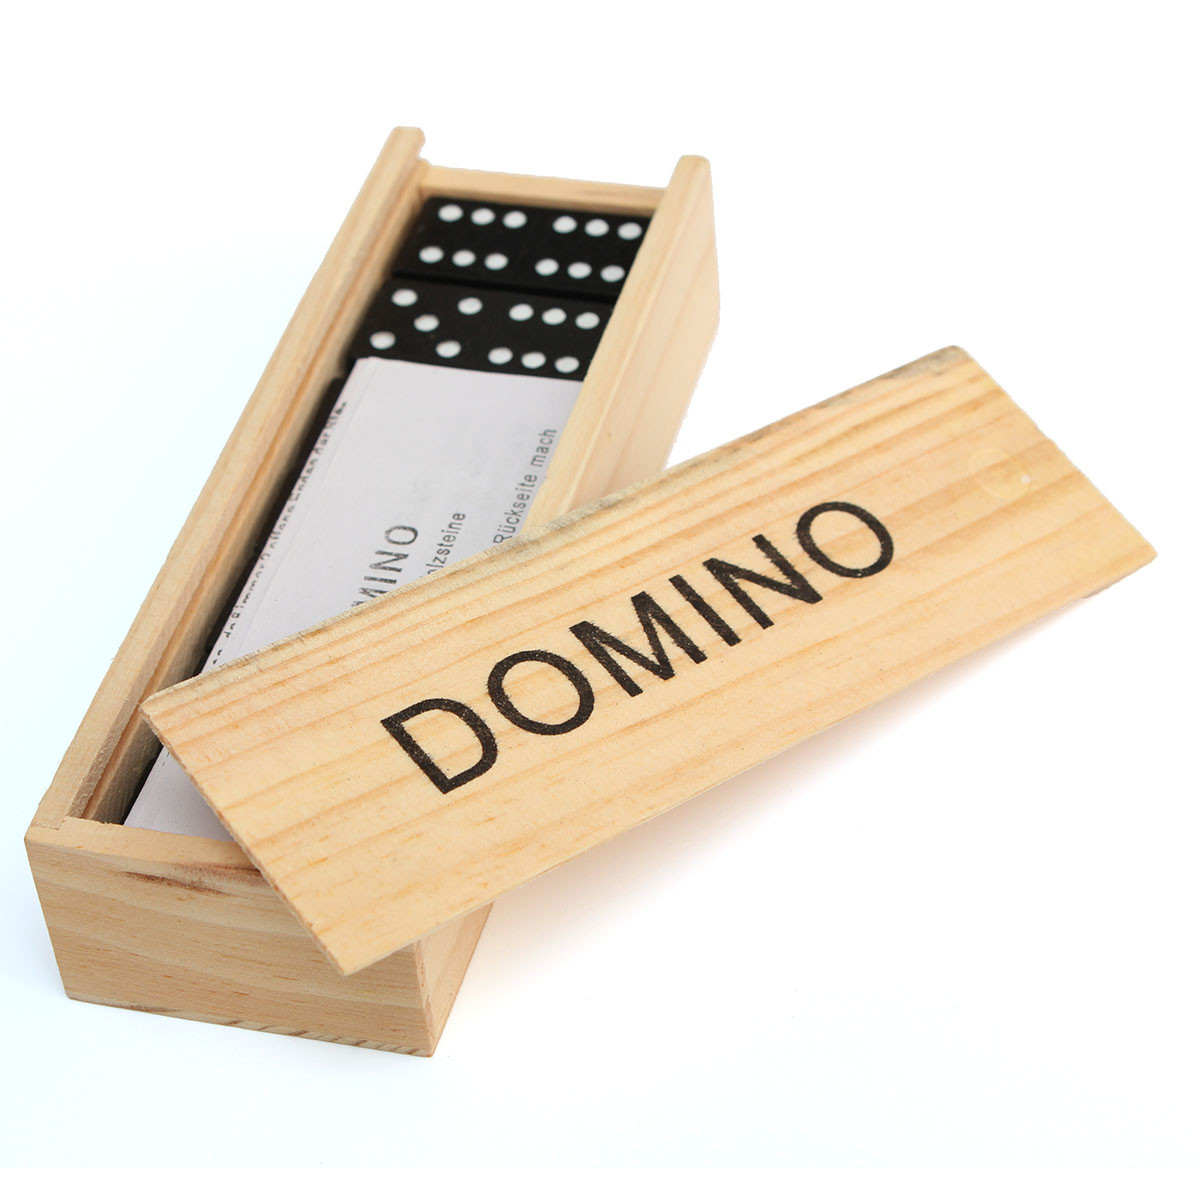 28pcs-Childrens-Wooden-Boxed-Domino-Game-Play-Set-Traditional-Classic-Toy-Gifts-1005343